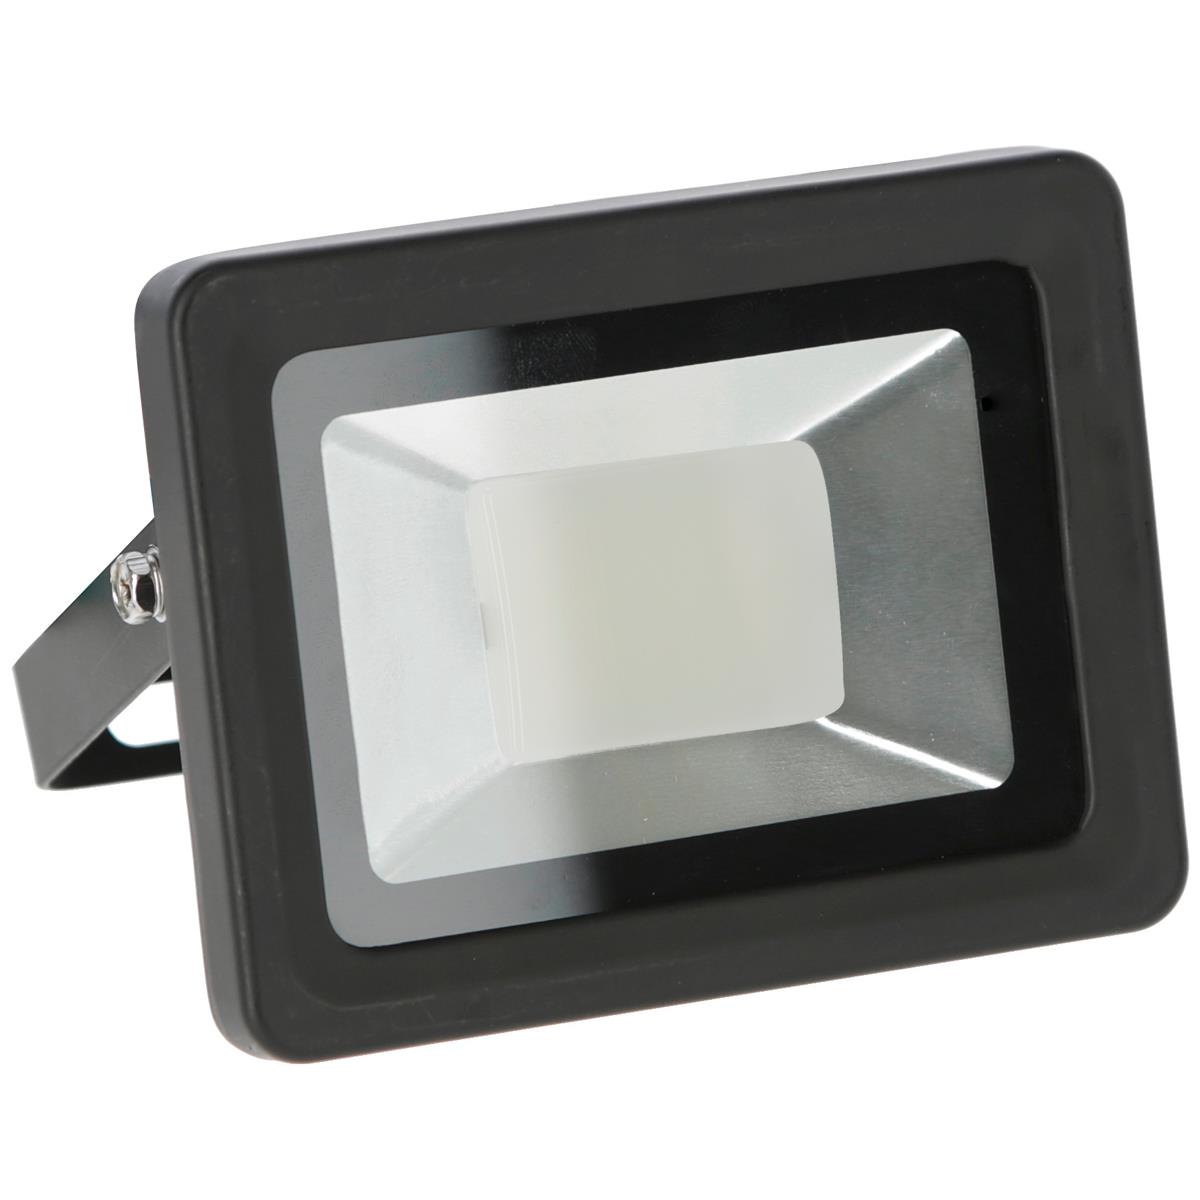 LED outdooor spotlight new! without motion sensor 10 W